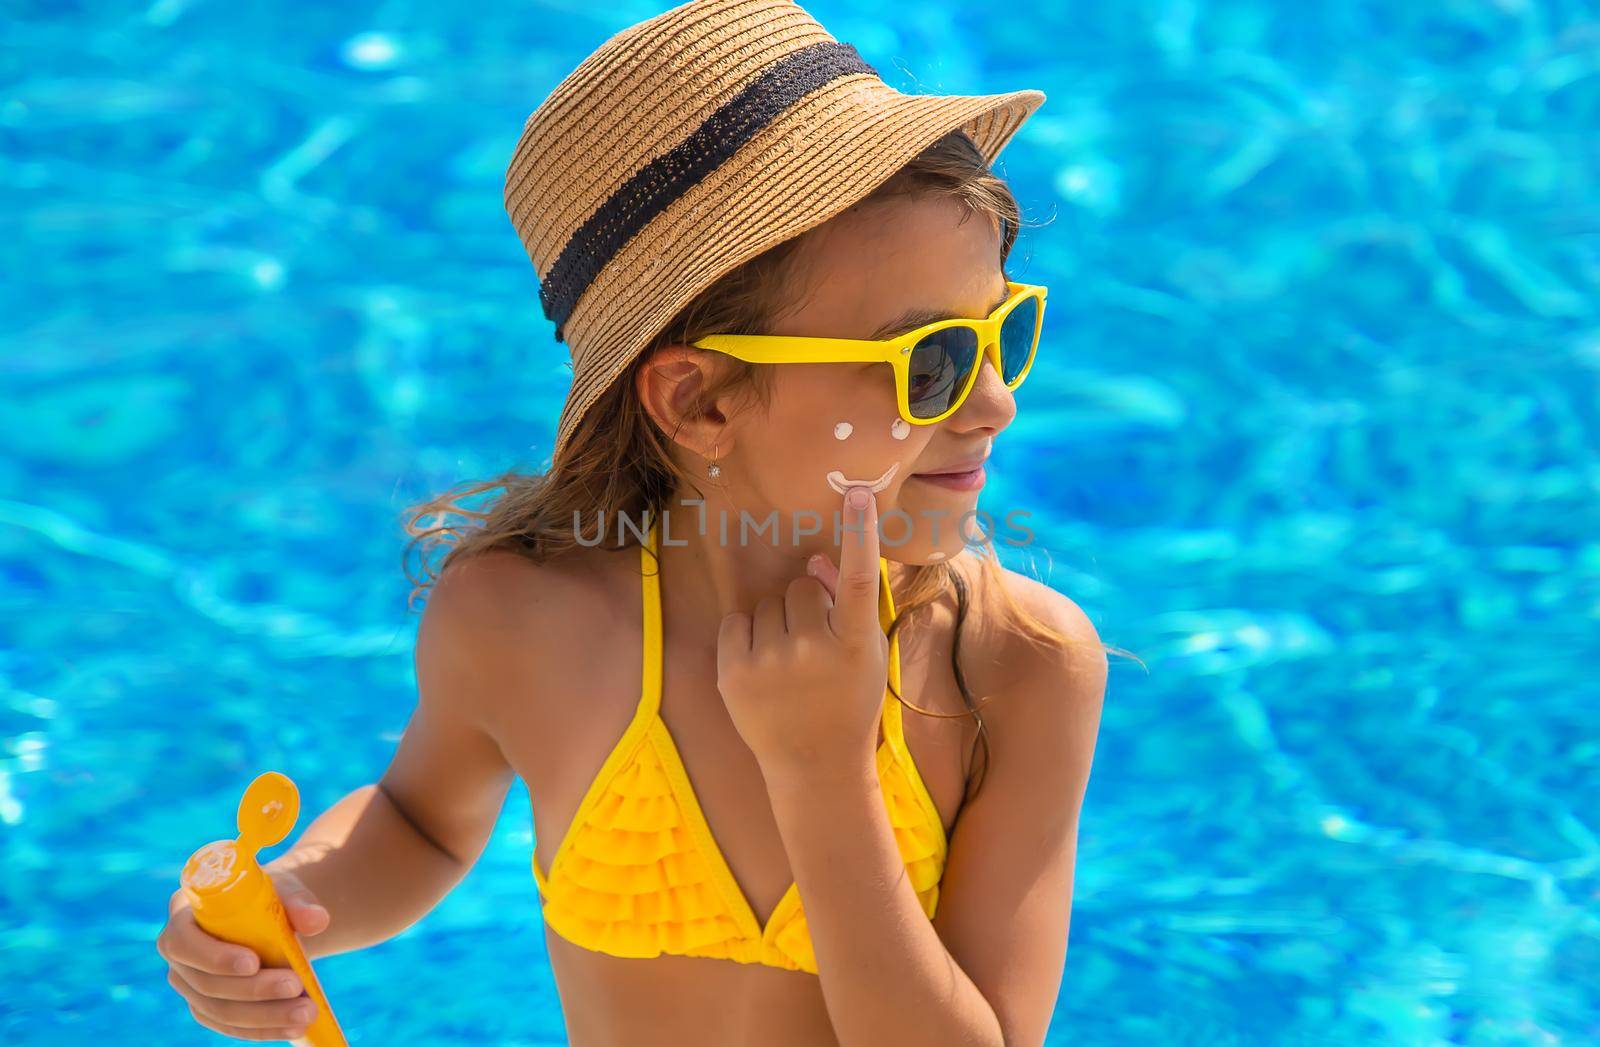 The child is putting sunscreen on her face. Selective focus. Kid.